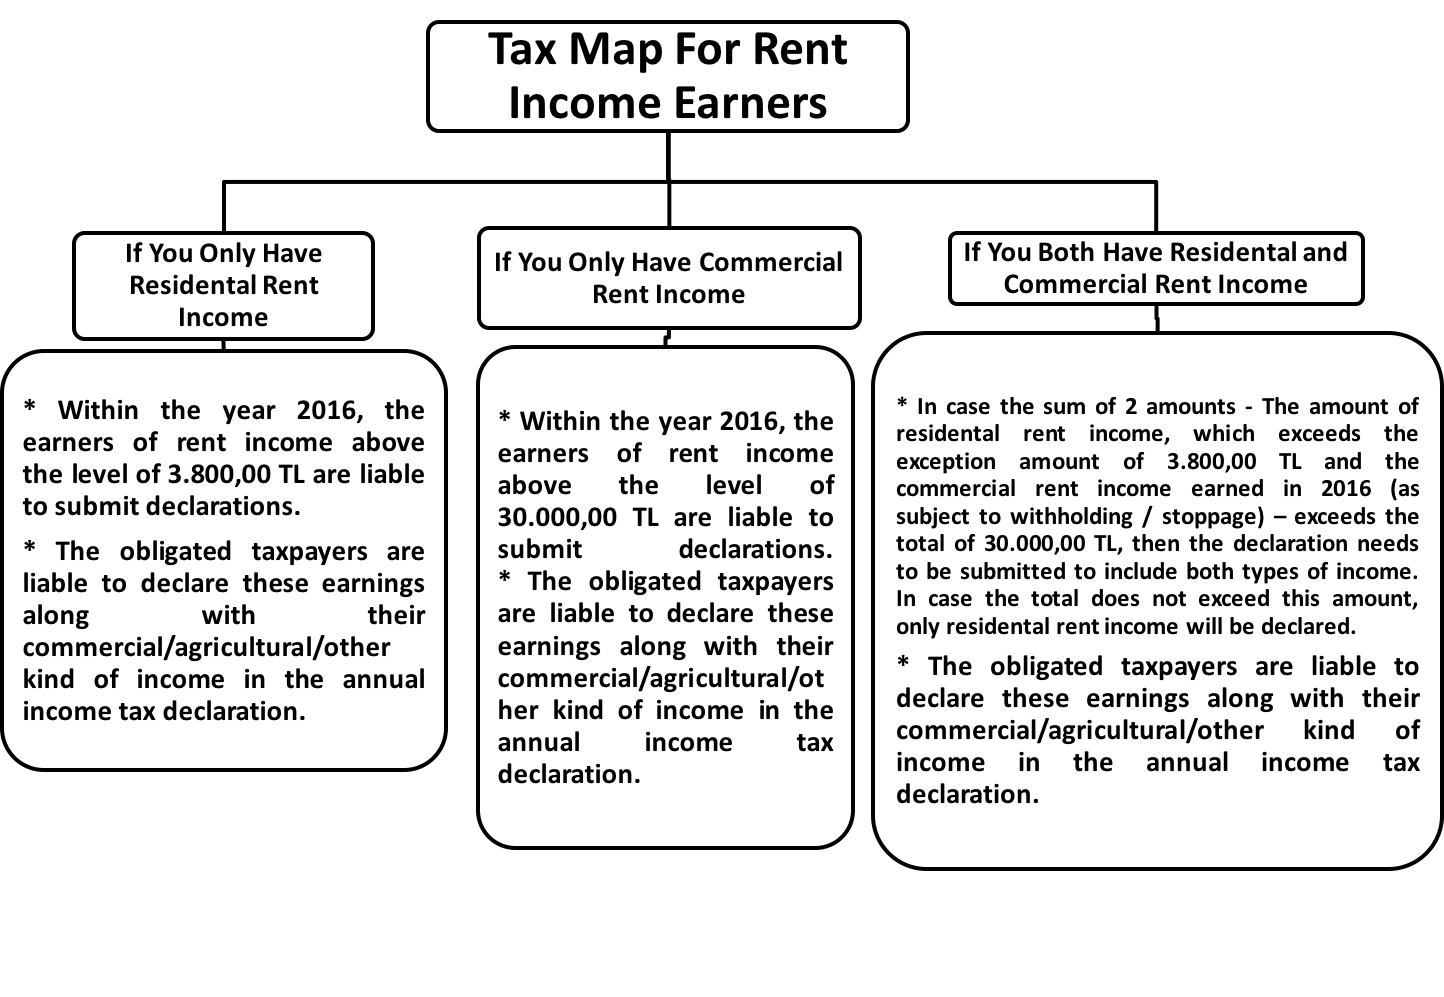 Tax Map for Rent Income Earners